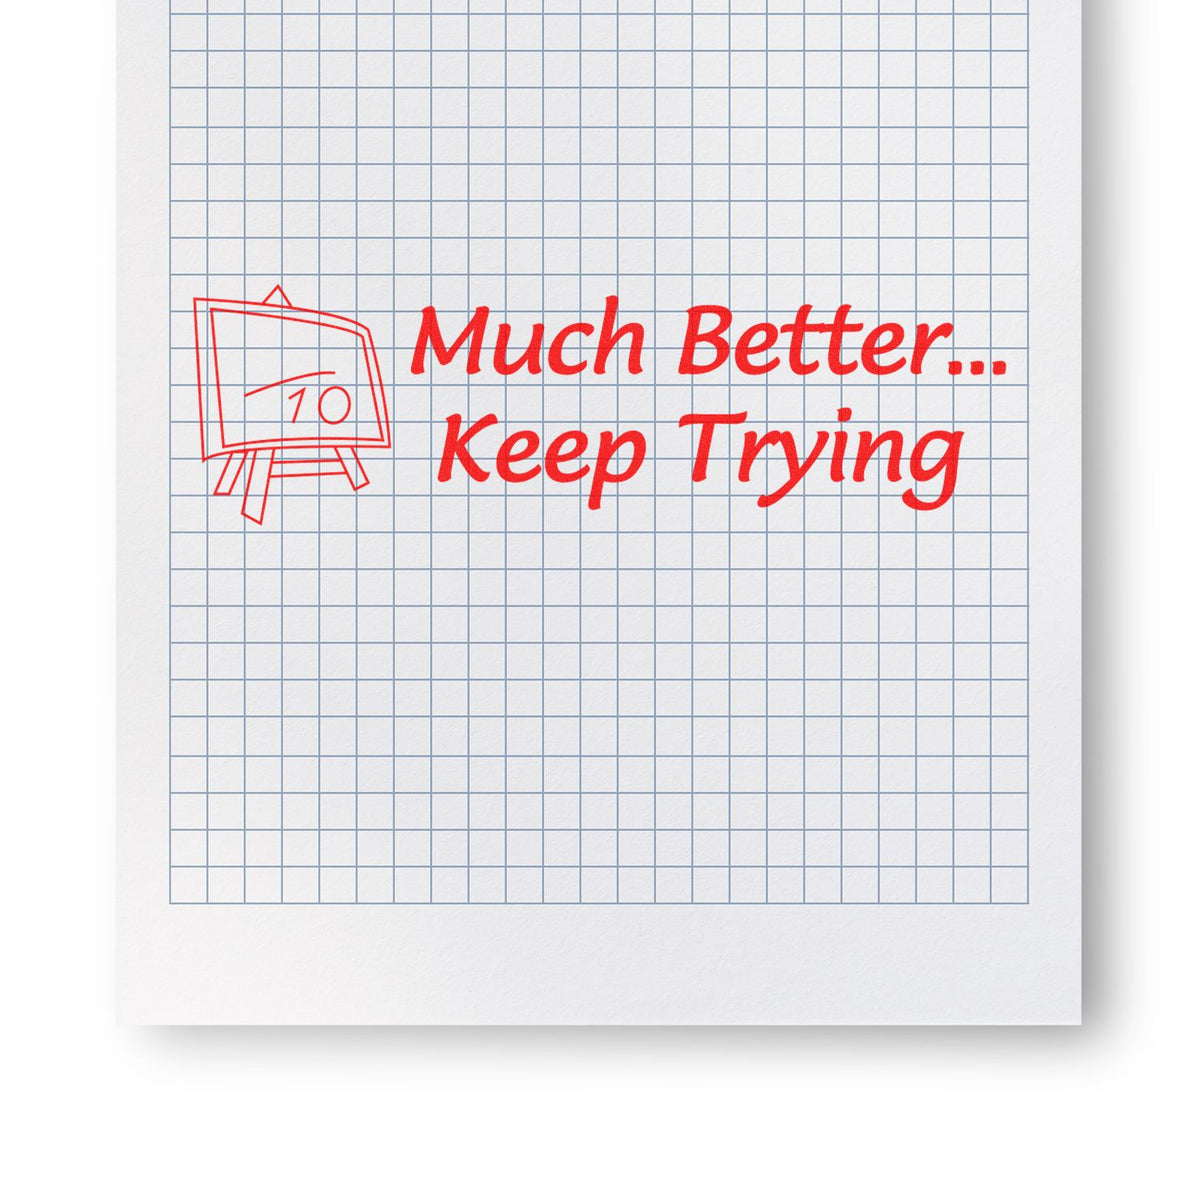 Much Better Keep Trying Rubber Stamp In Use Photo